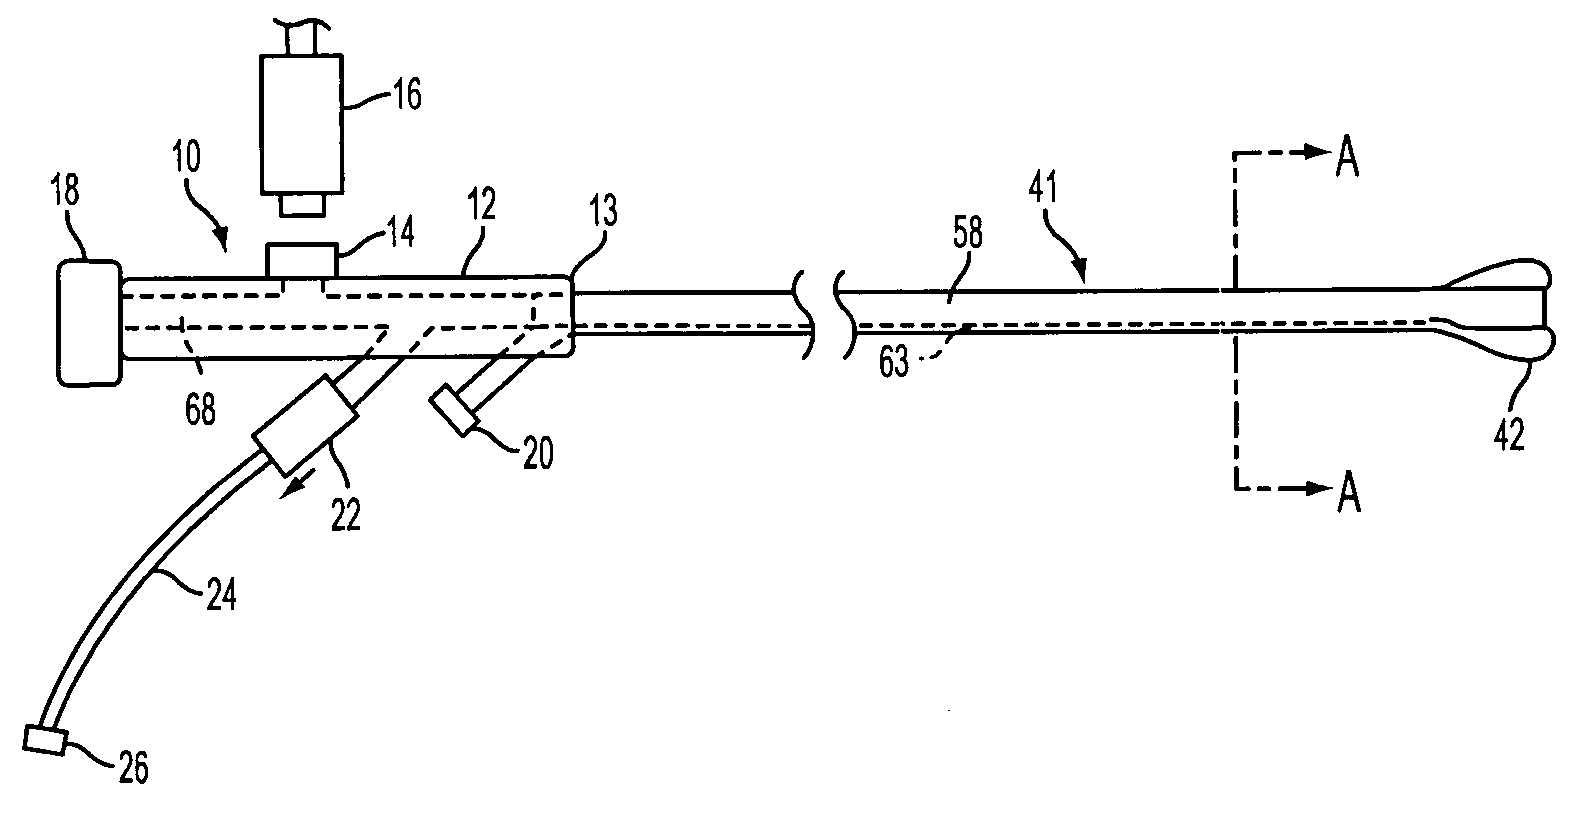 Proximal catheter assembly allowing for natural and suction-assisted aspiration